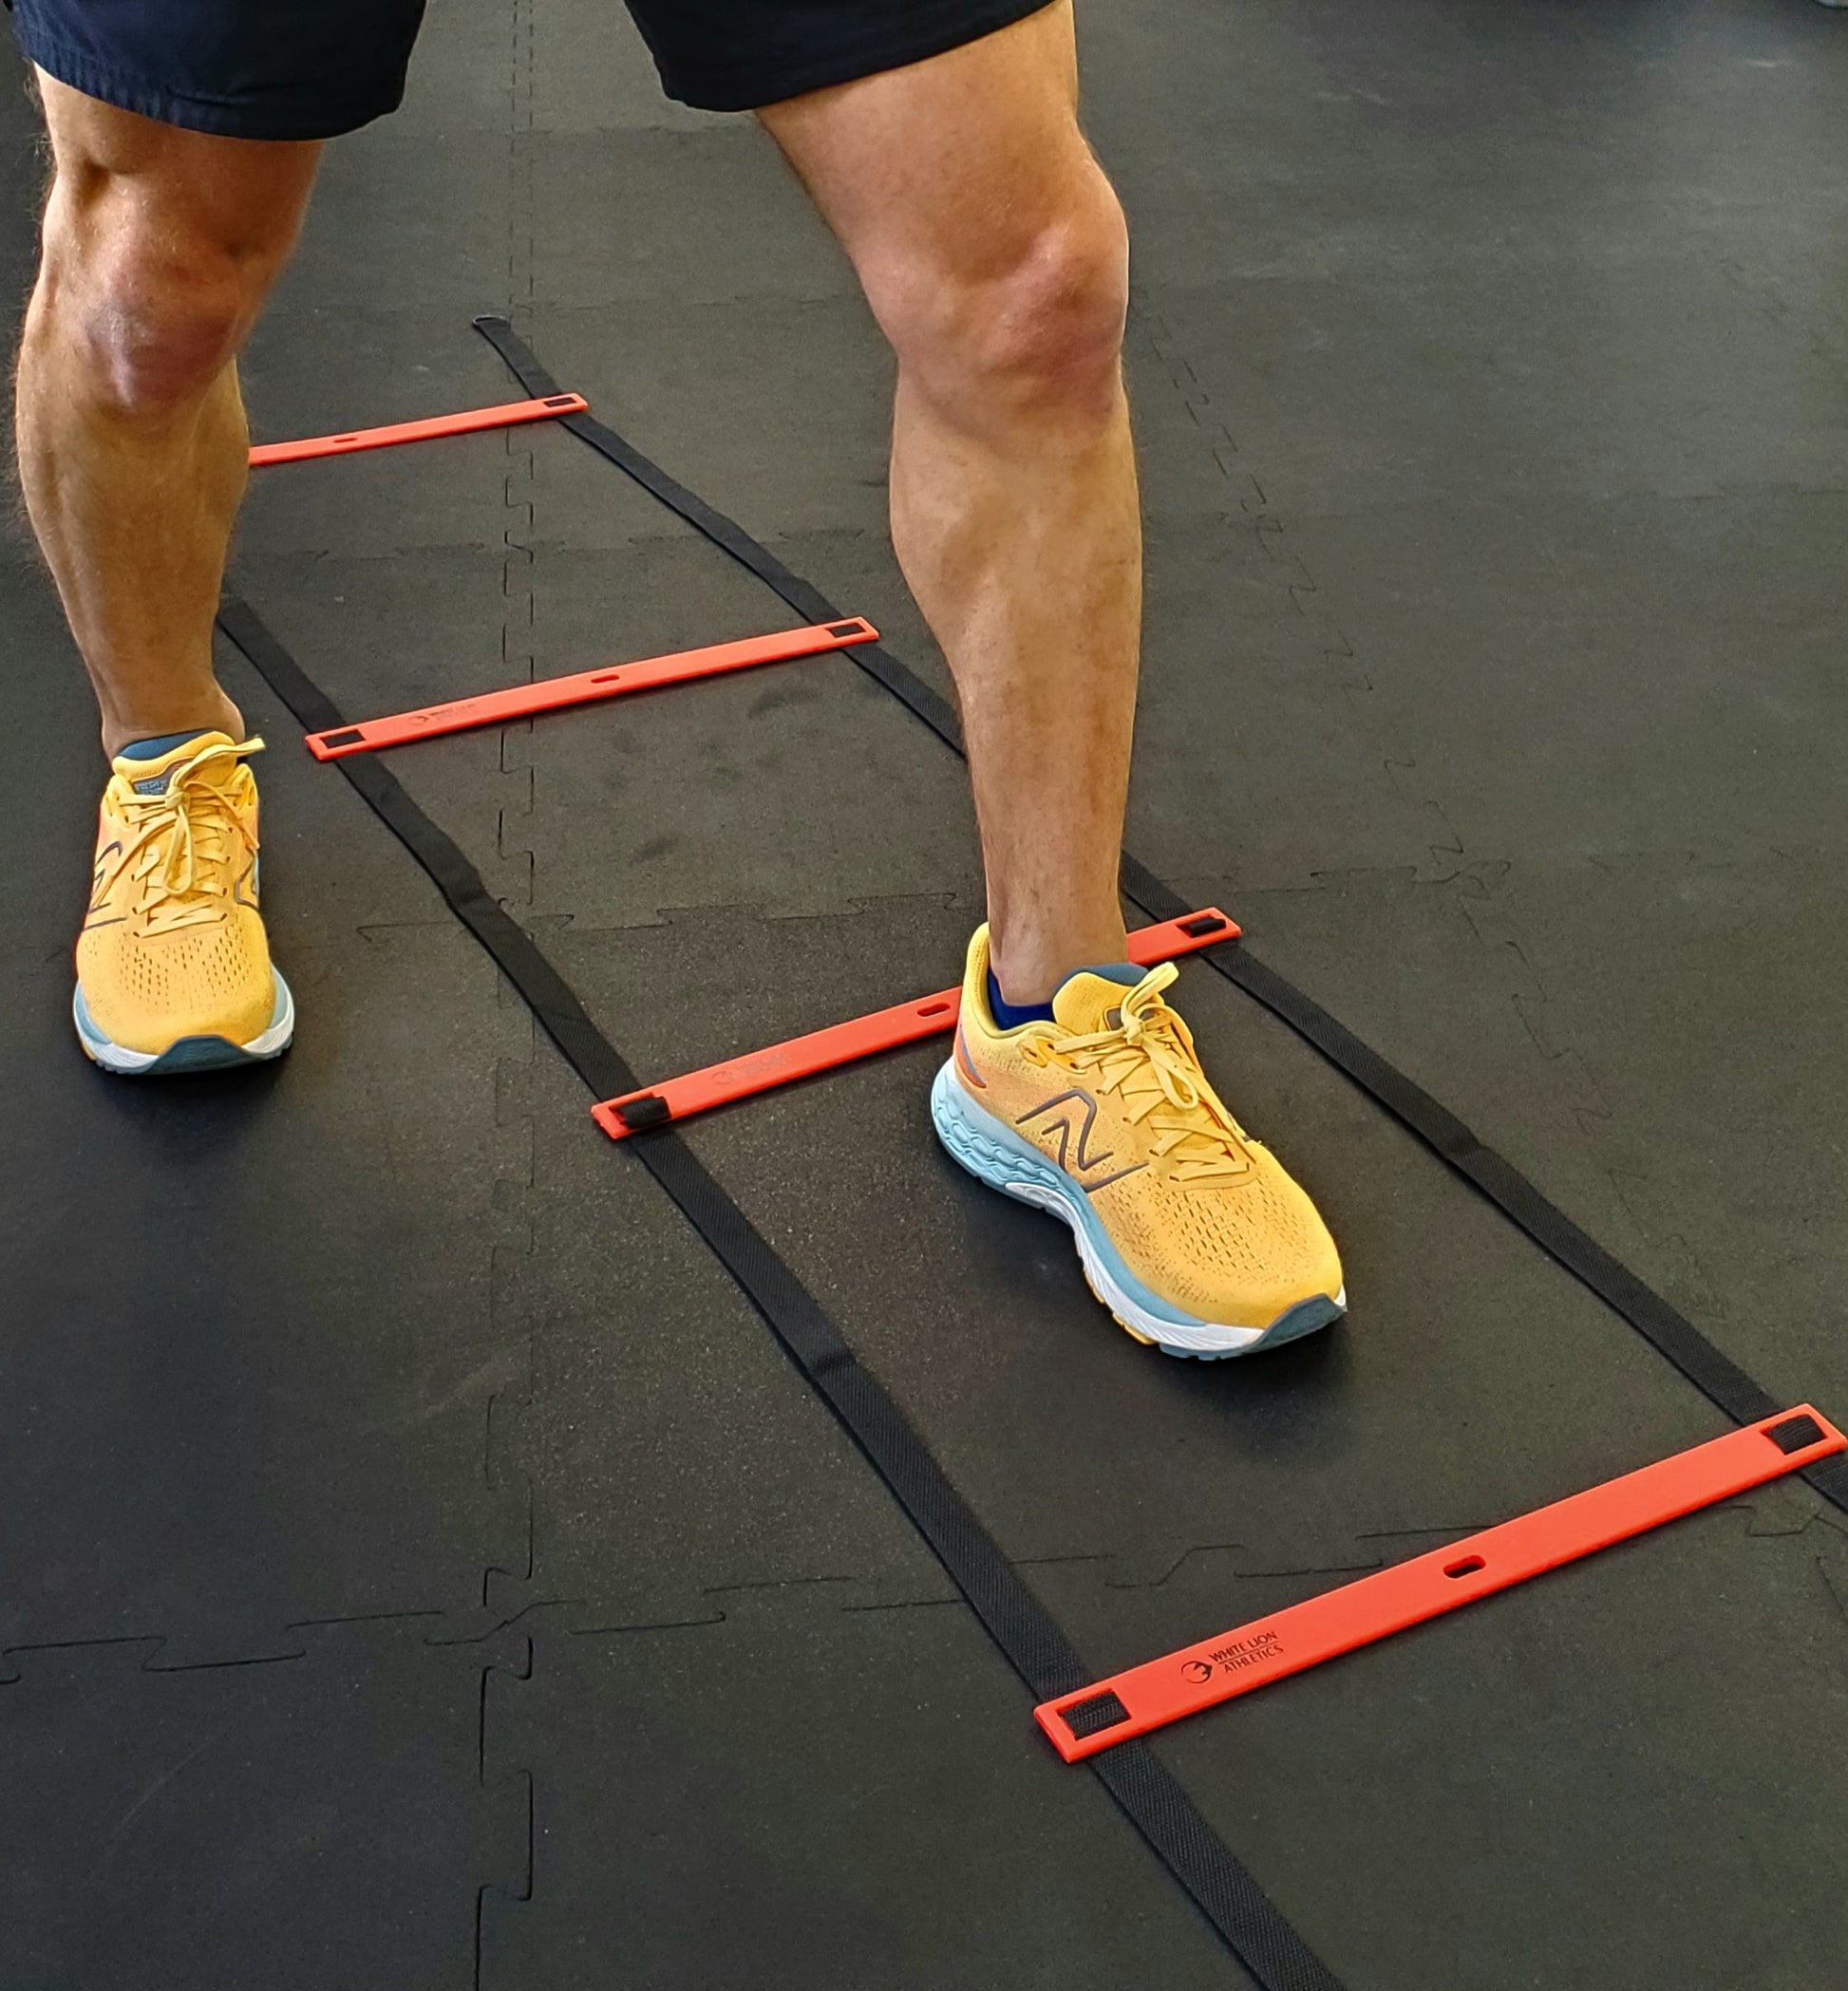 The left foot of an athlete is shown in the centre of the agility ladder while performing an agility drill with the six metre long White Lion athletics agility ladder